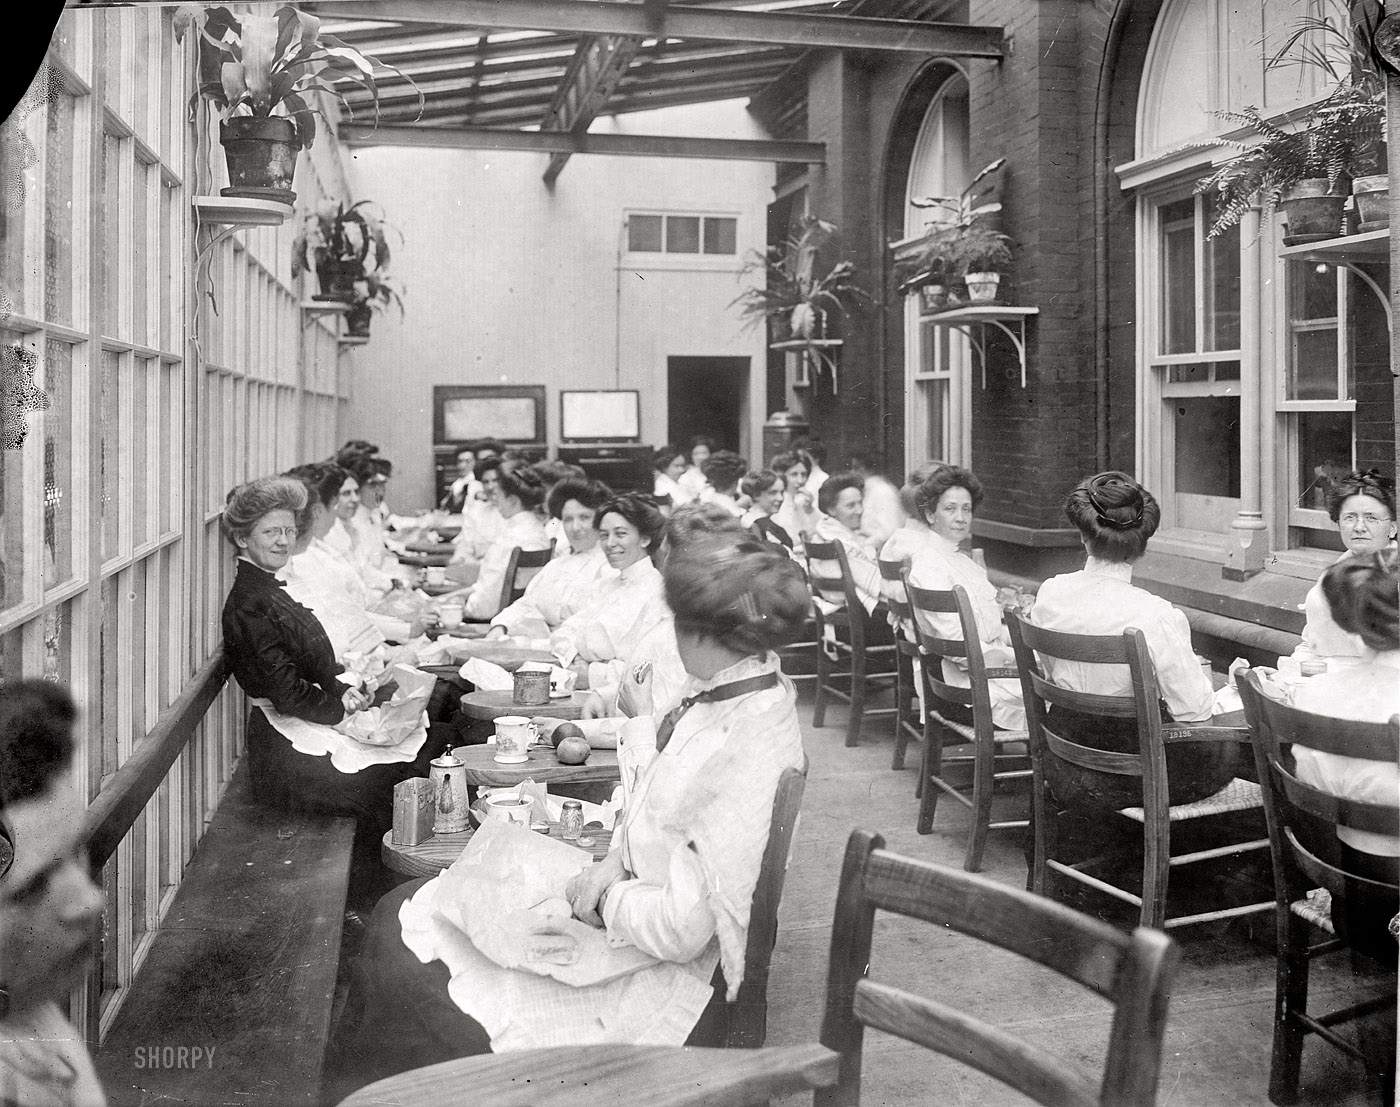 Circa 1913. "Bureau of Engraving and Printing." This would seem to be the ladies' lunchroom. National Photo Company Collection glass negative. View full size.